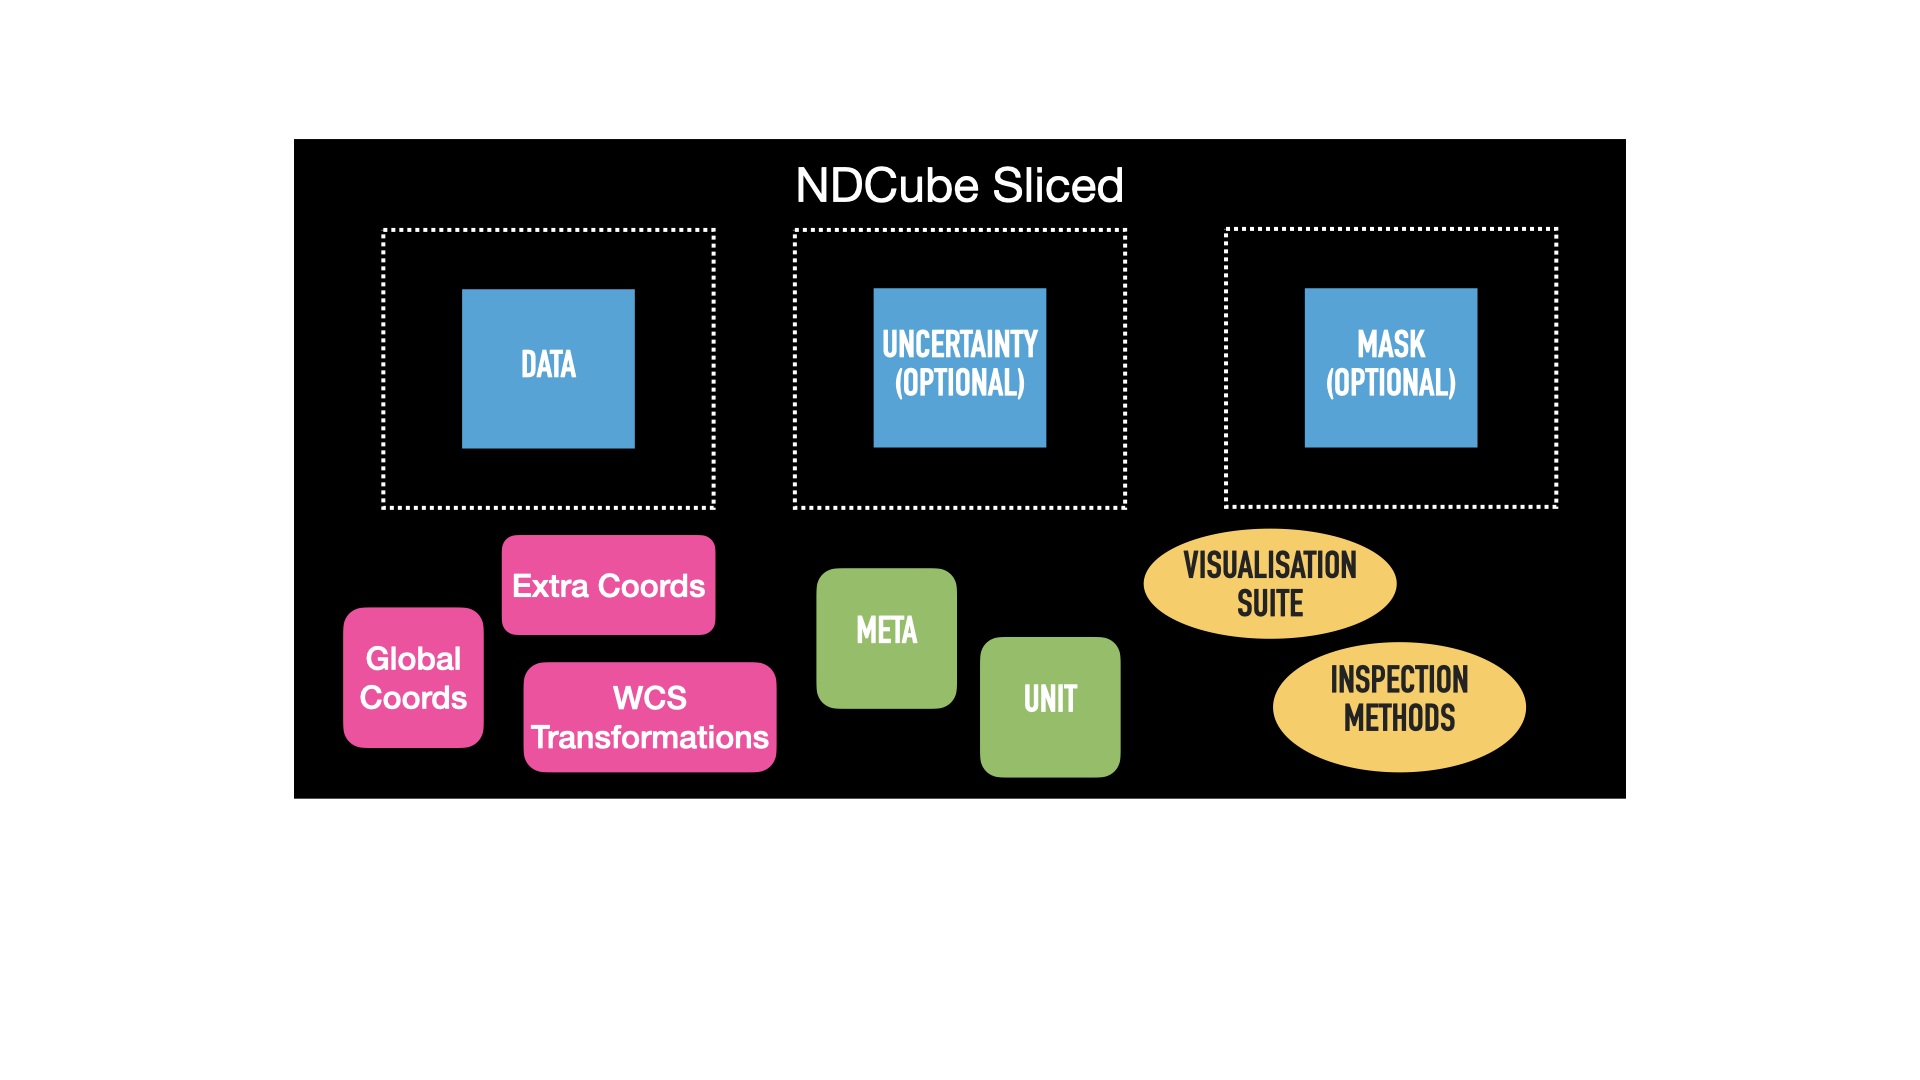 Components of an NDCube after slicing.